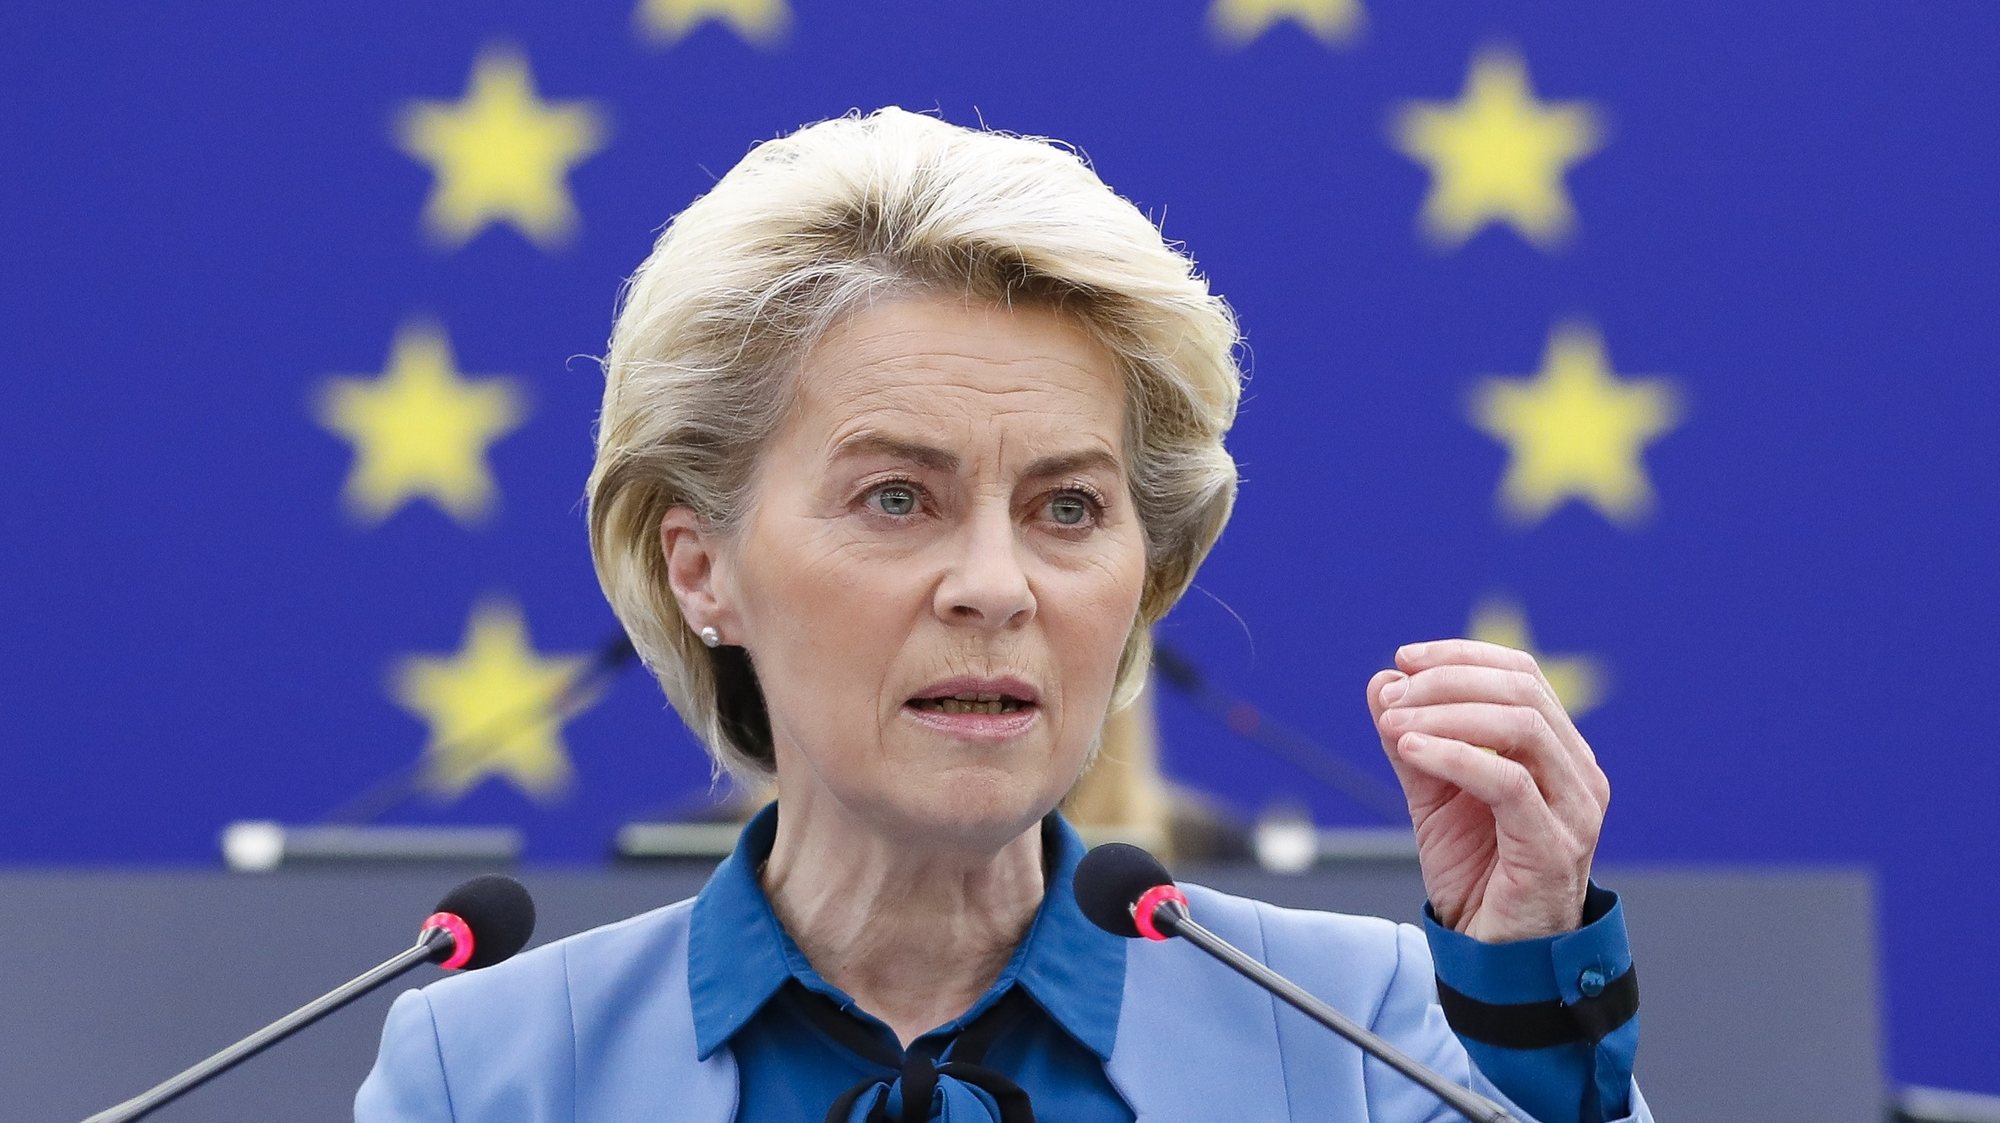 epa09761578 European Commission President Ursula von der Leyen delivers a speech on the EU-Russia relations, European security and Russia’s military threat against Ukraine, during a plenary session of the European Parliament in Strasbourg, France, 16 February 2022. The session of the European Parliament runs from 14 until 17 February.  EPA/JULIEN WARNAND